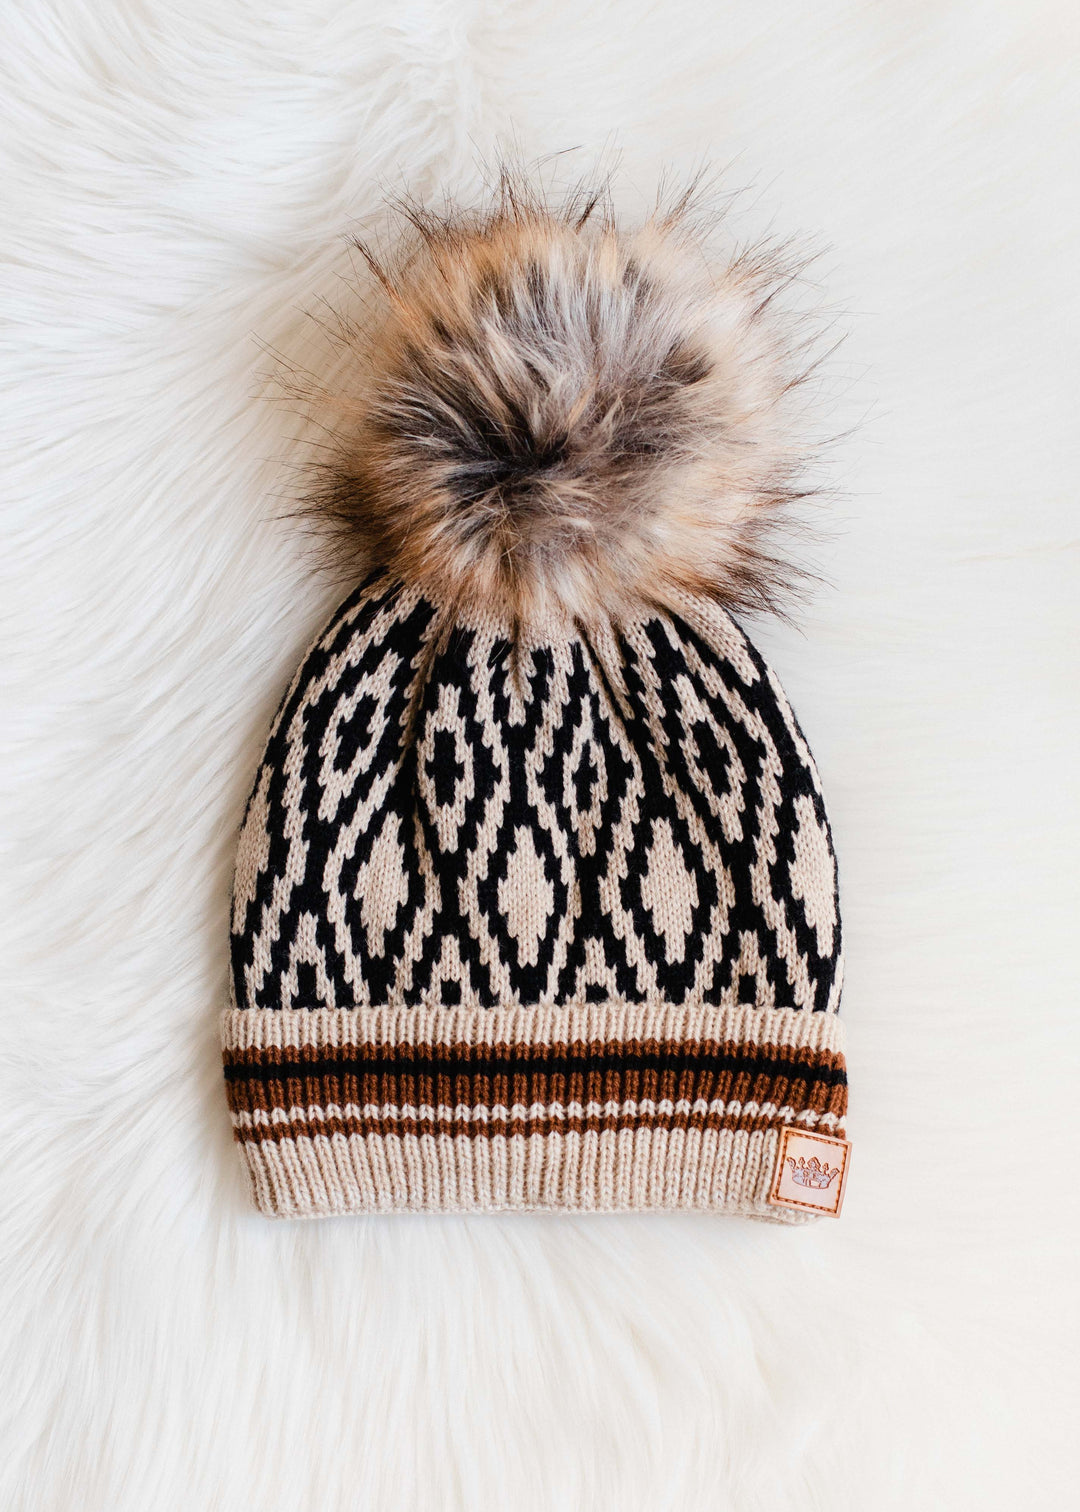 Panache Brown and Black Patterned Knit Beanie